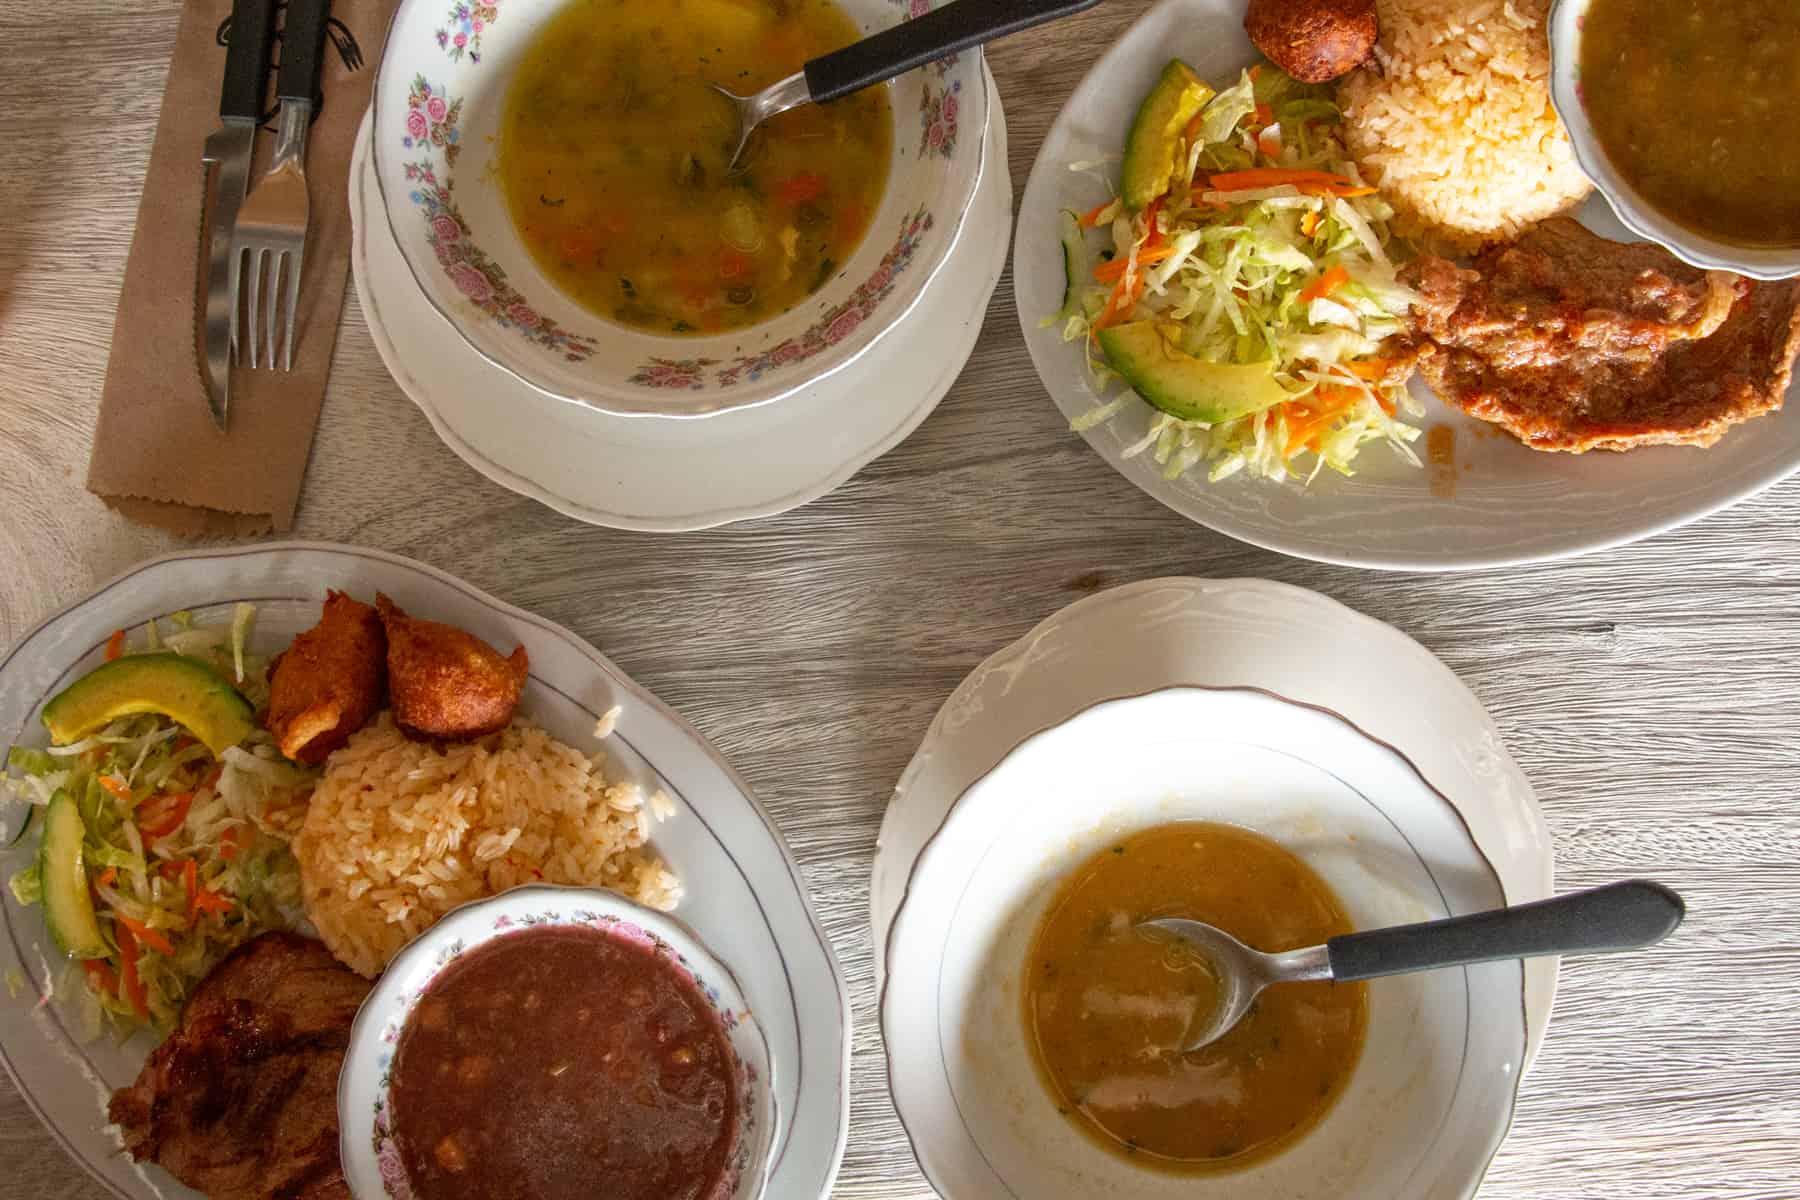 Plates of soup, meat and salad